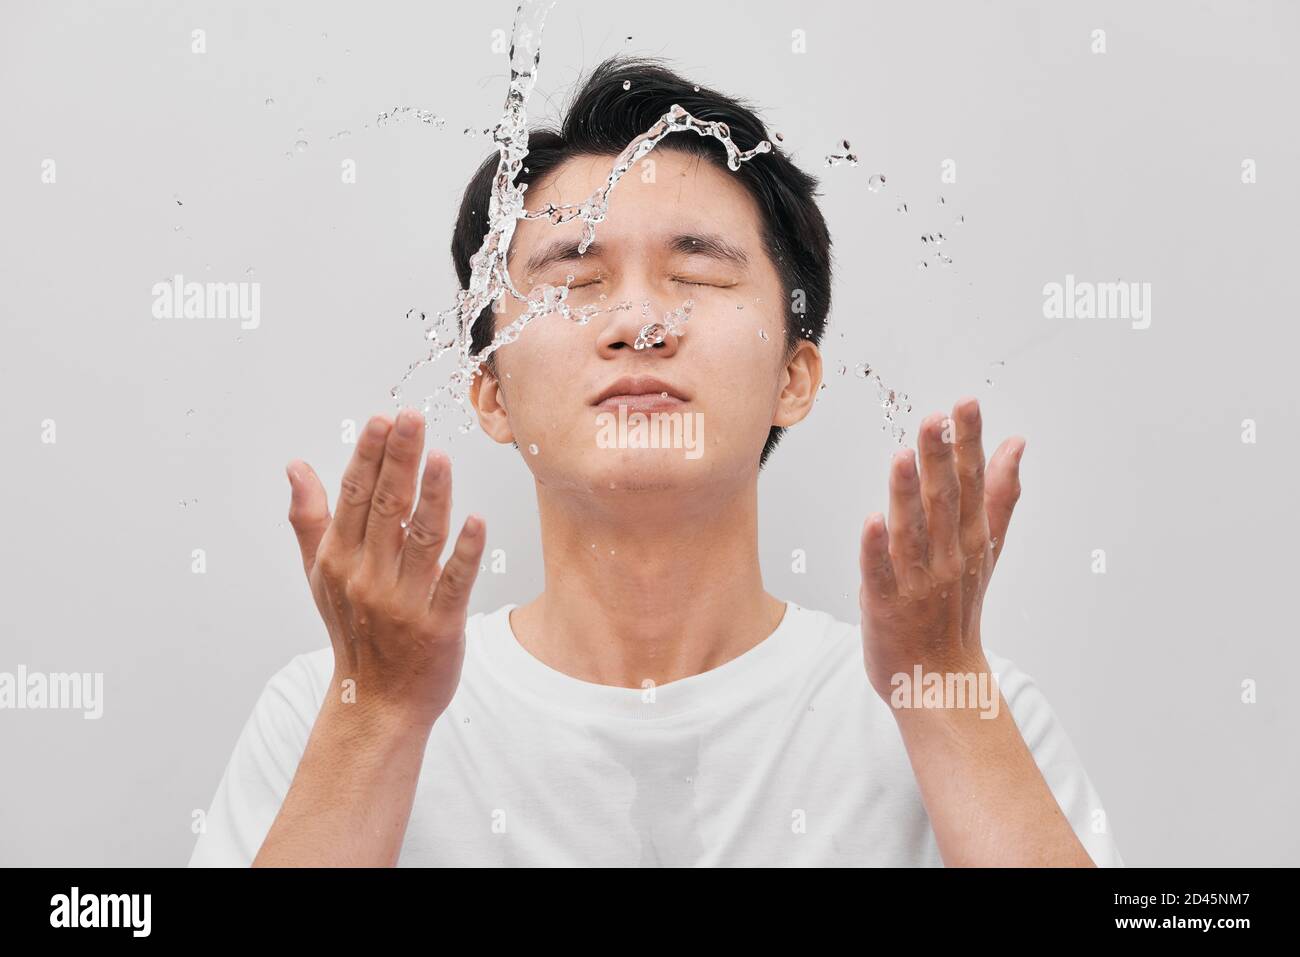 Young man spraying water on his face over gray background Stock Photo